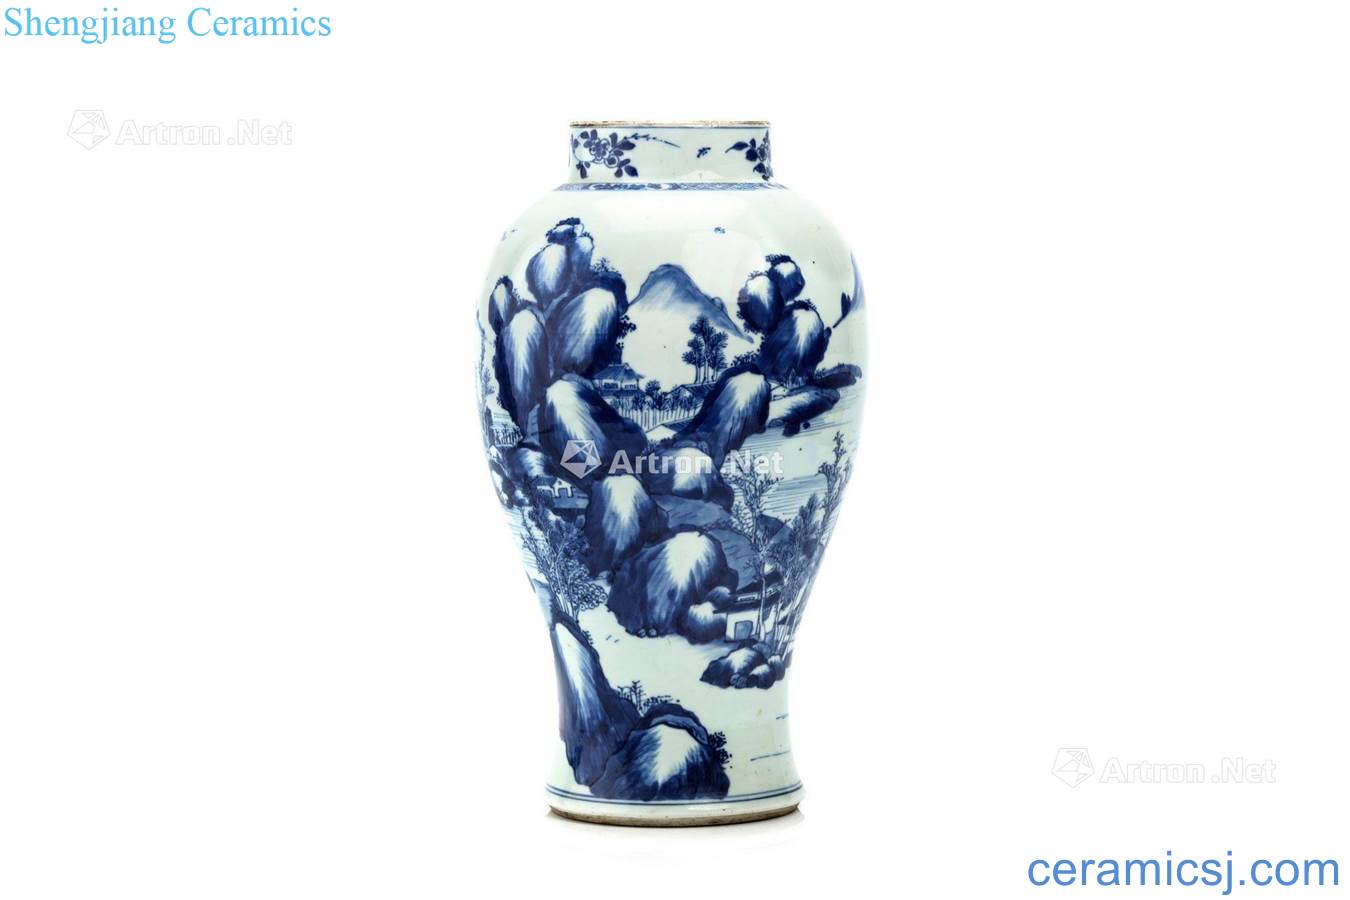 In the 18th century qing porcelain bottles